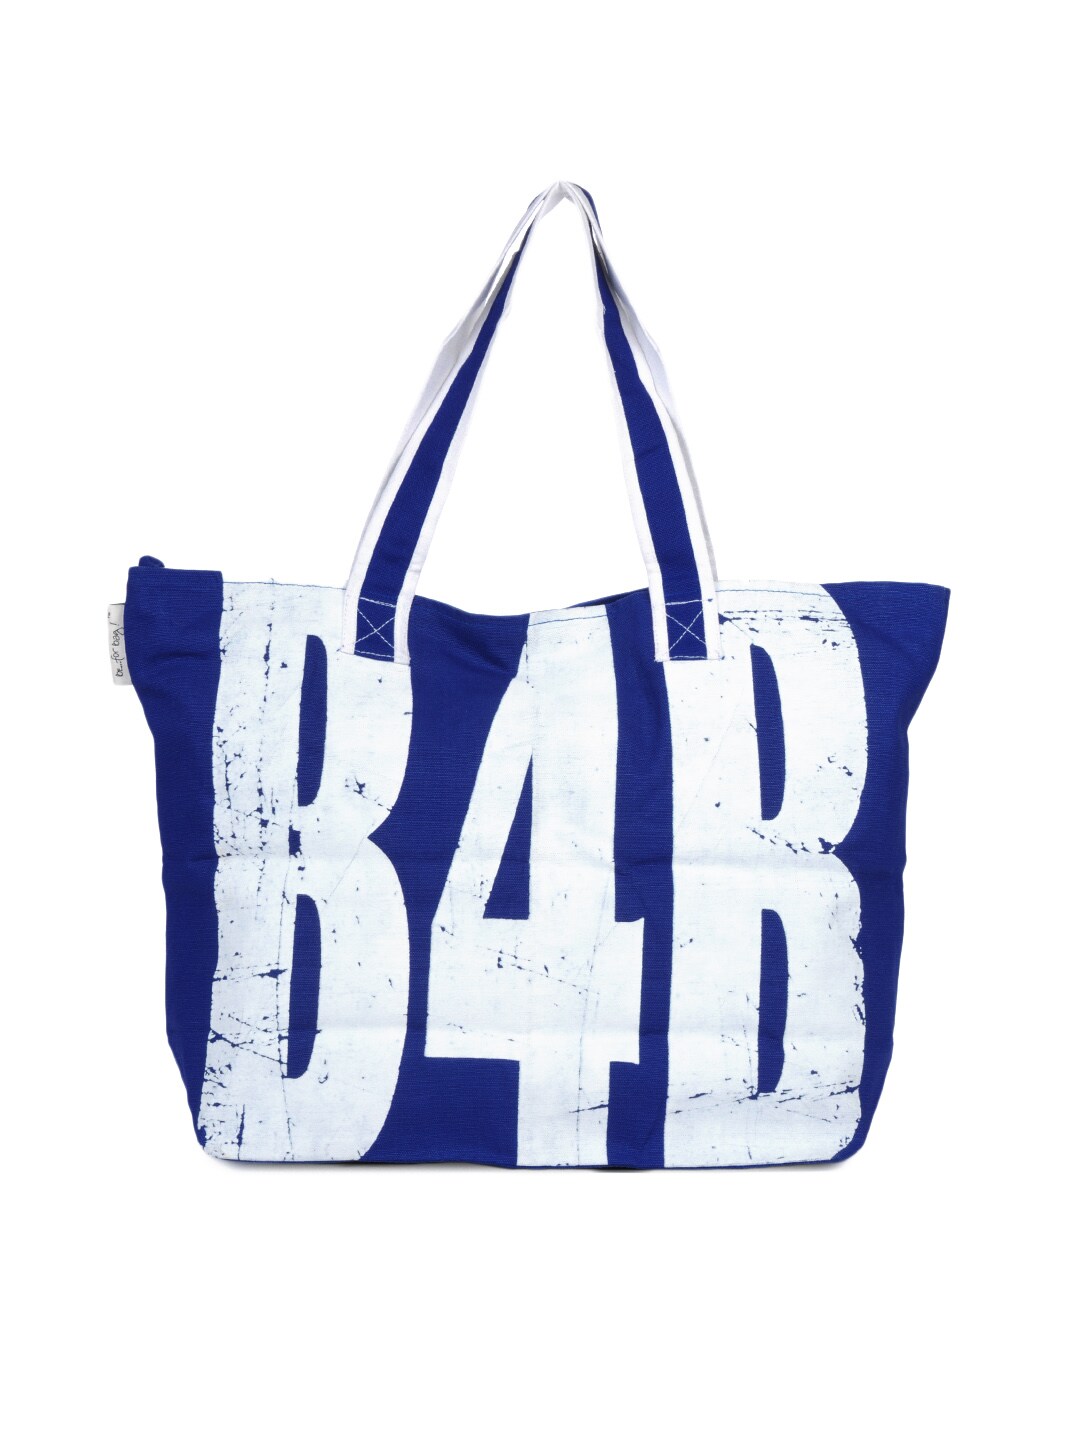 Be For Bag Women Blue Tote Bag